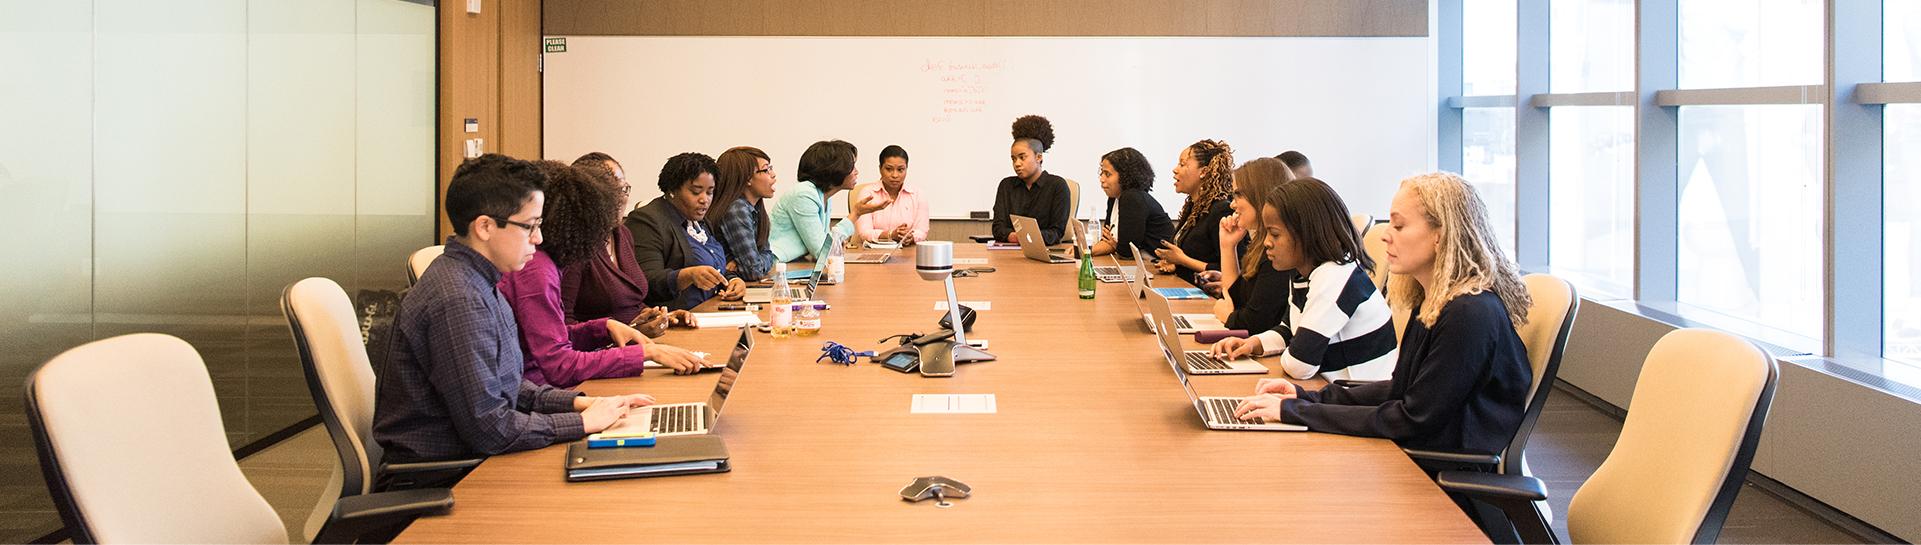 A group of professionals sitting at a conference room table